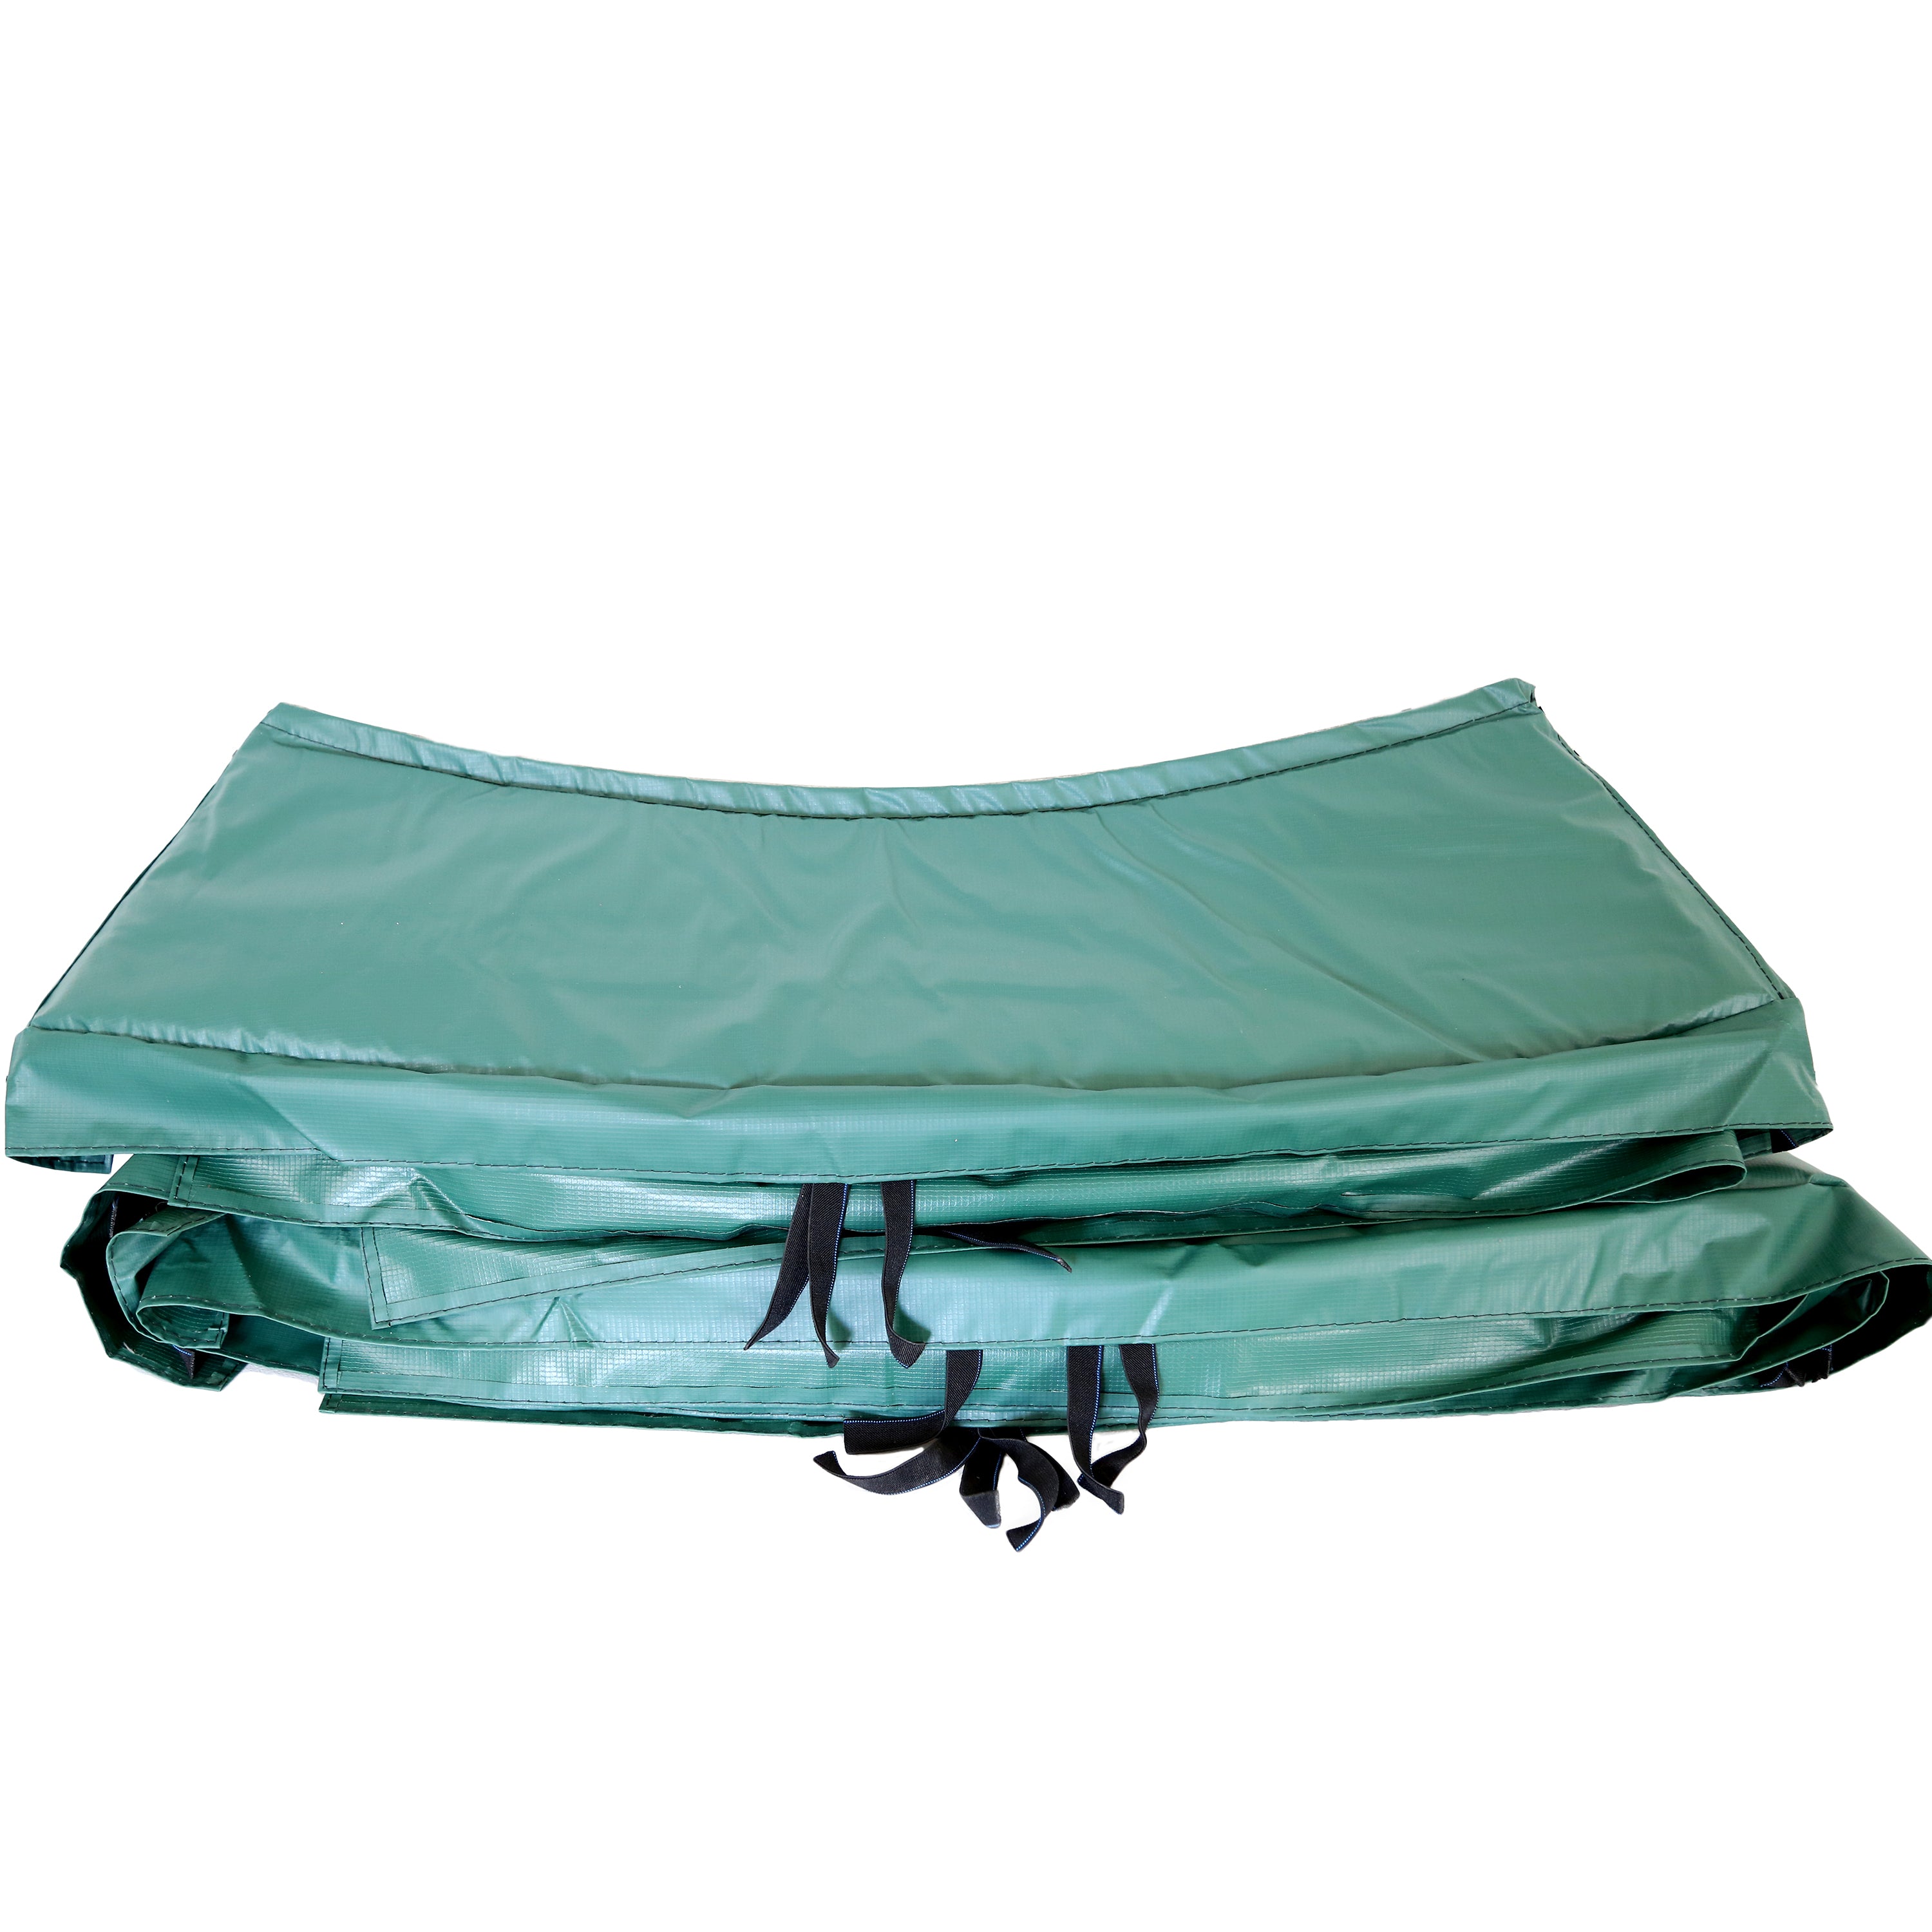 Green polyvinyl chloride spring pad designed for 12-foot round trampoline. 